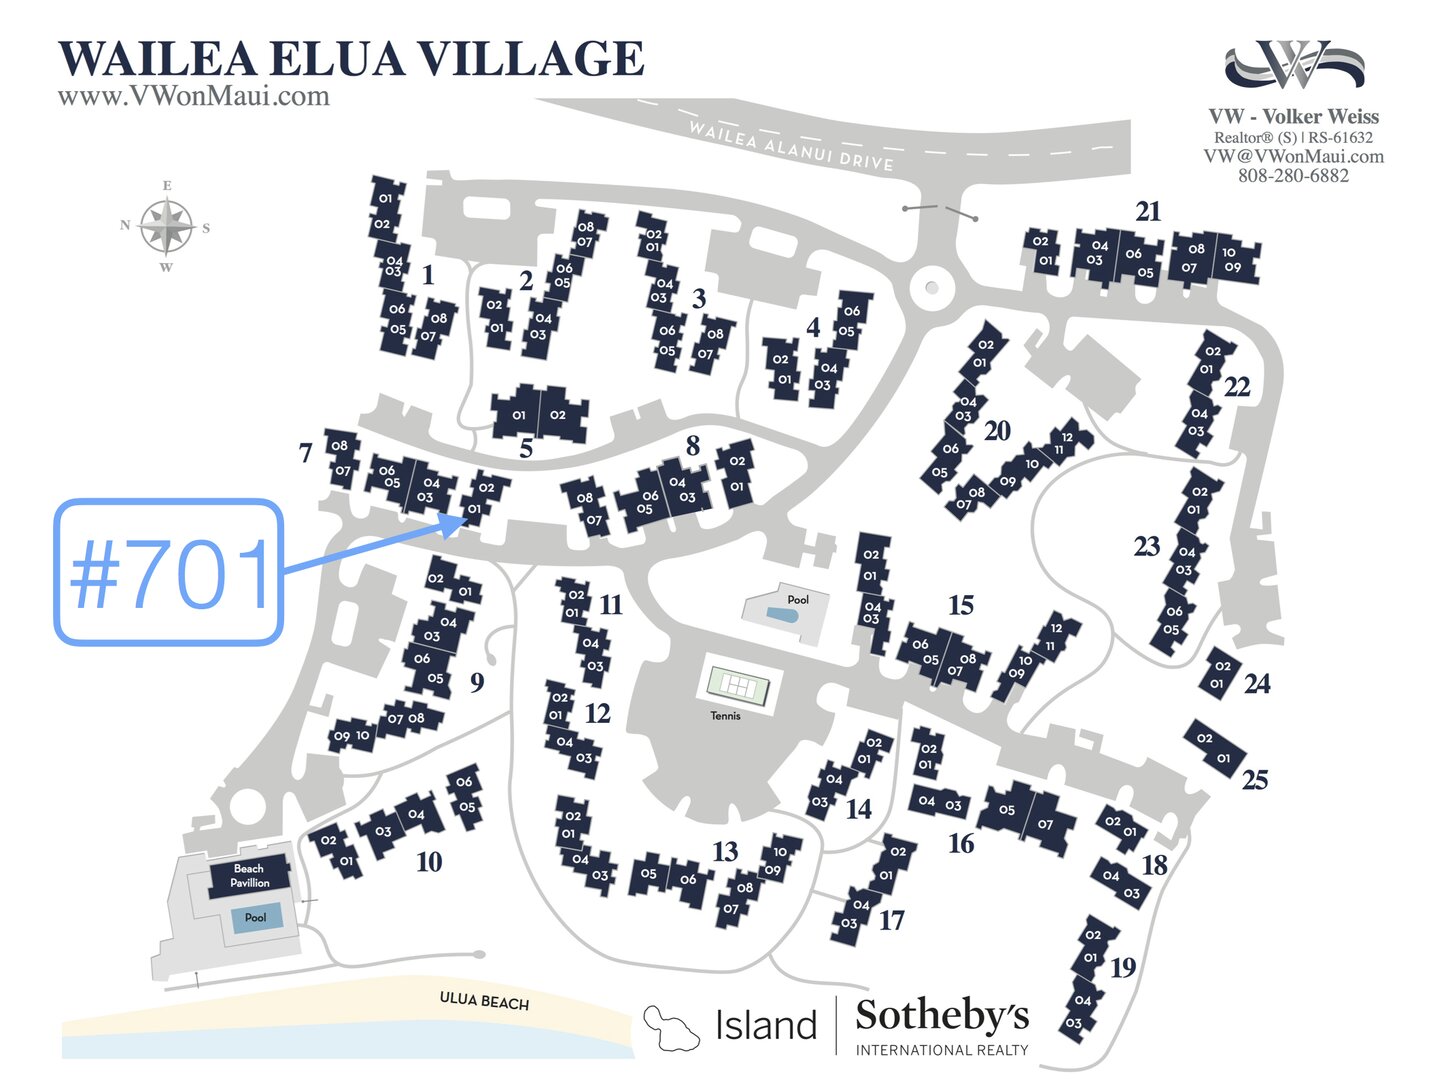 Map of Elua Village showing the location of our condo